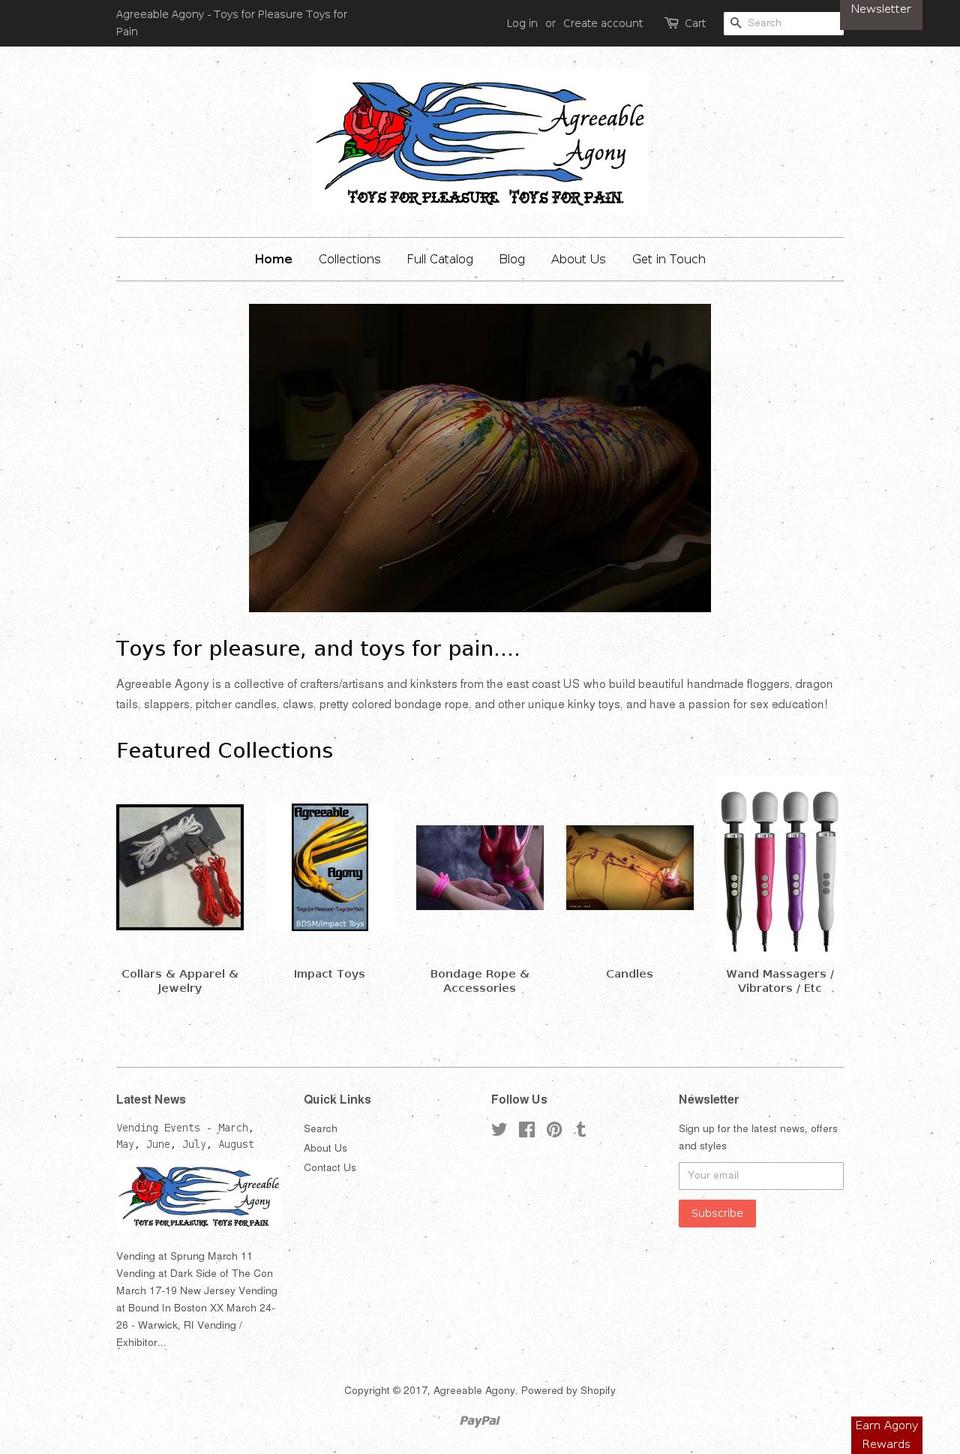 Craft Shopify theme site example agreeableagony.com